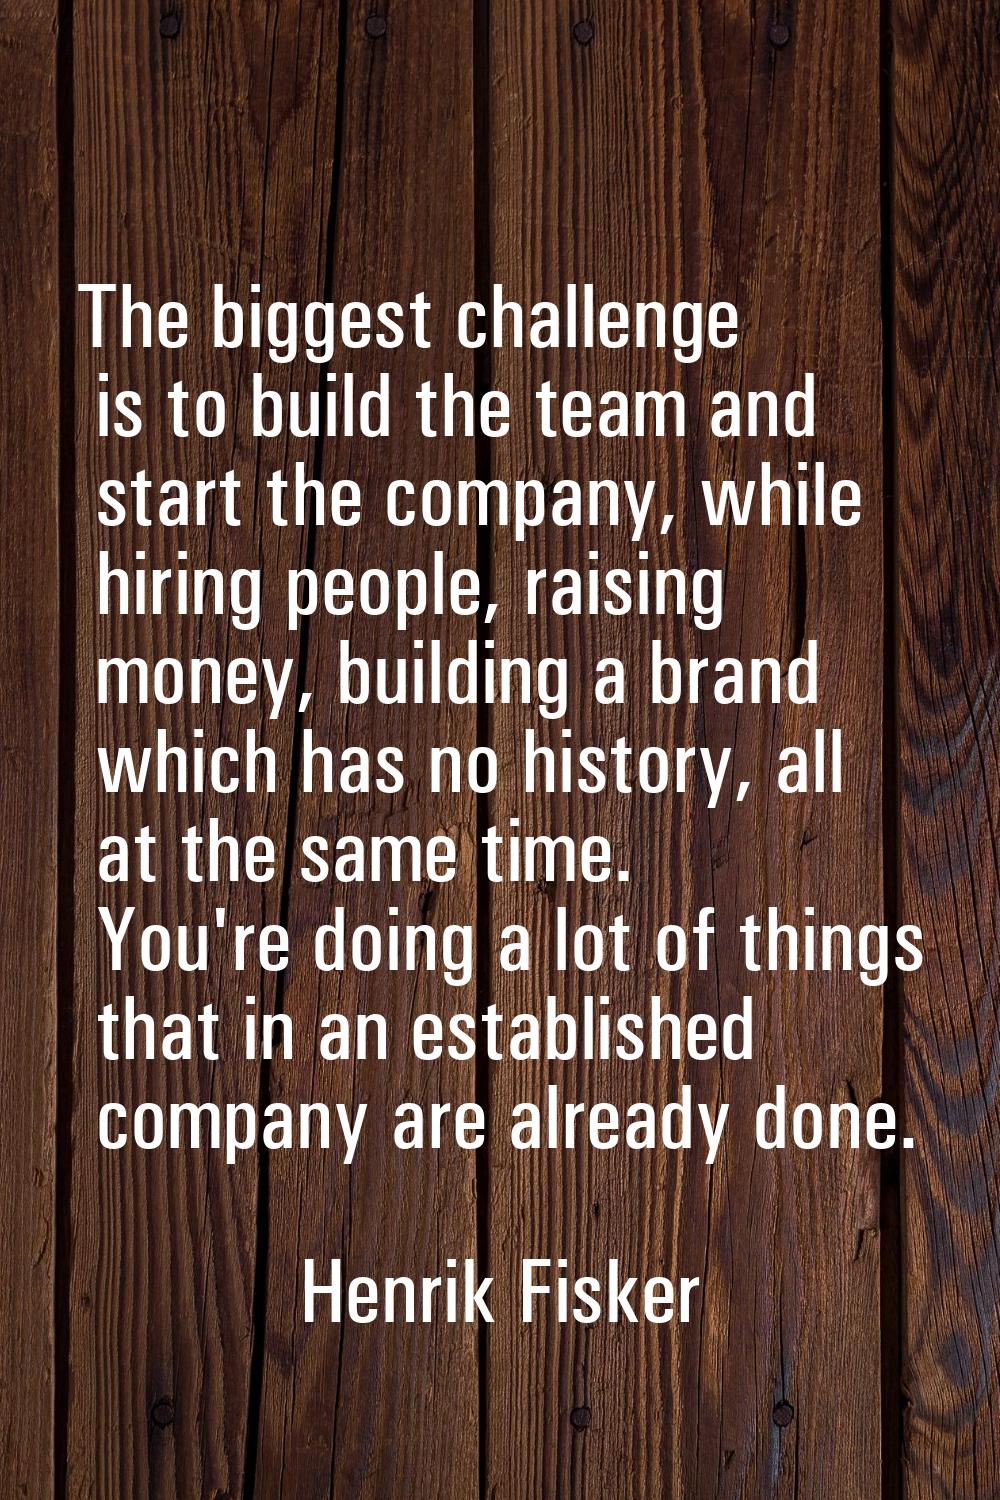 The biggest challenge is to build the team and start the company, while hiring people, raising mone